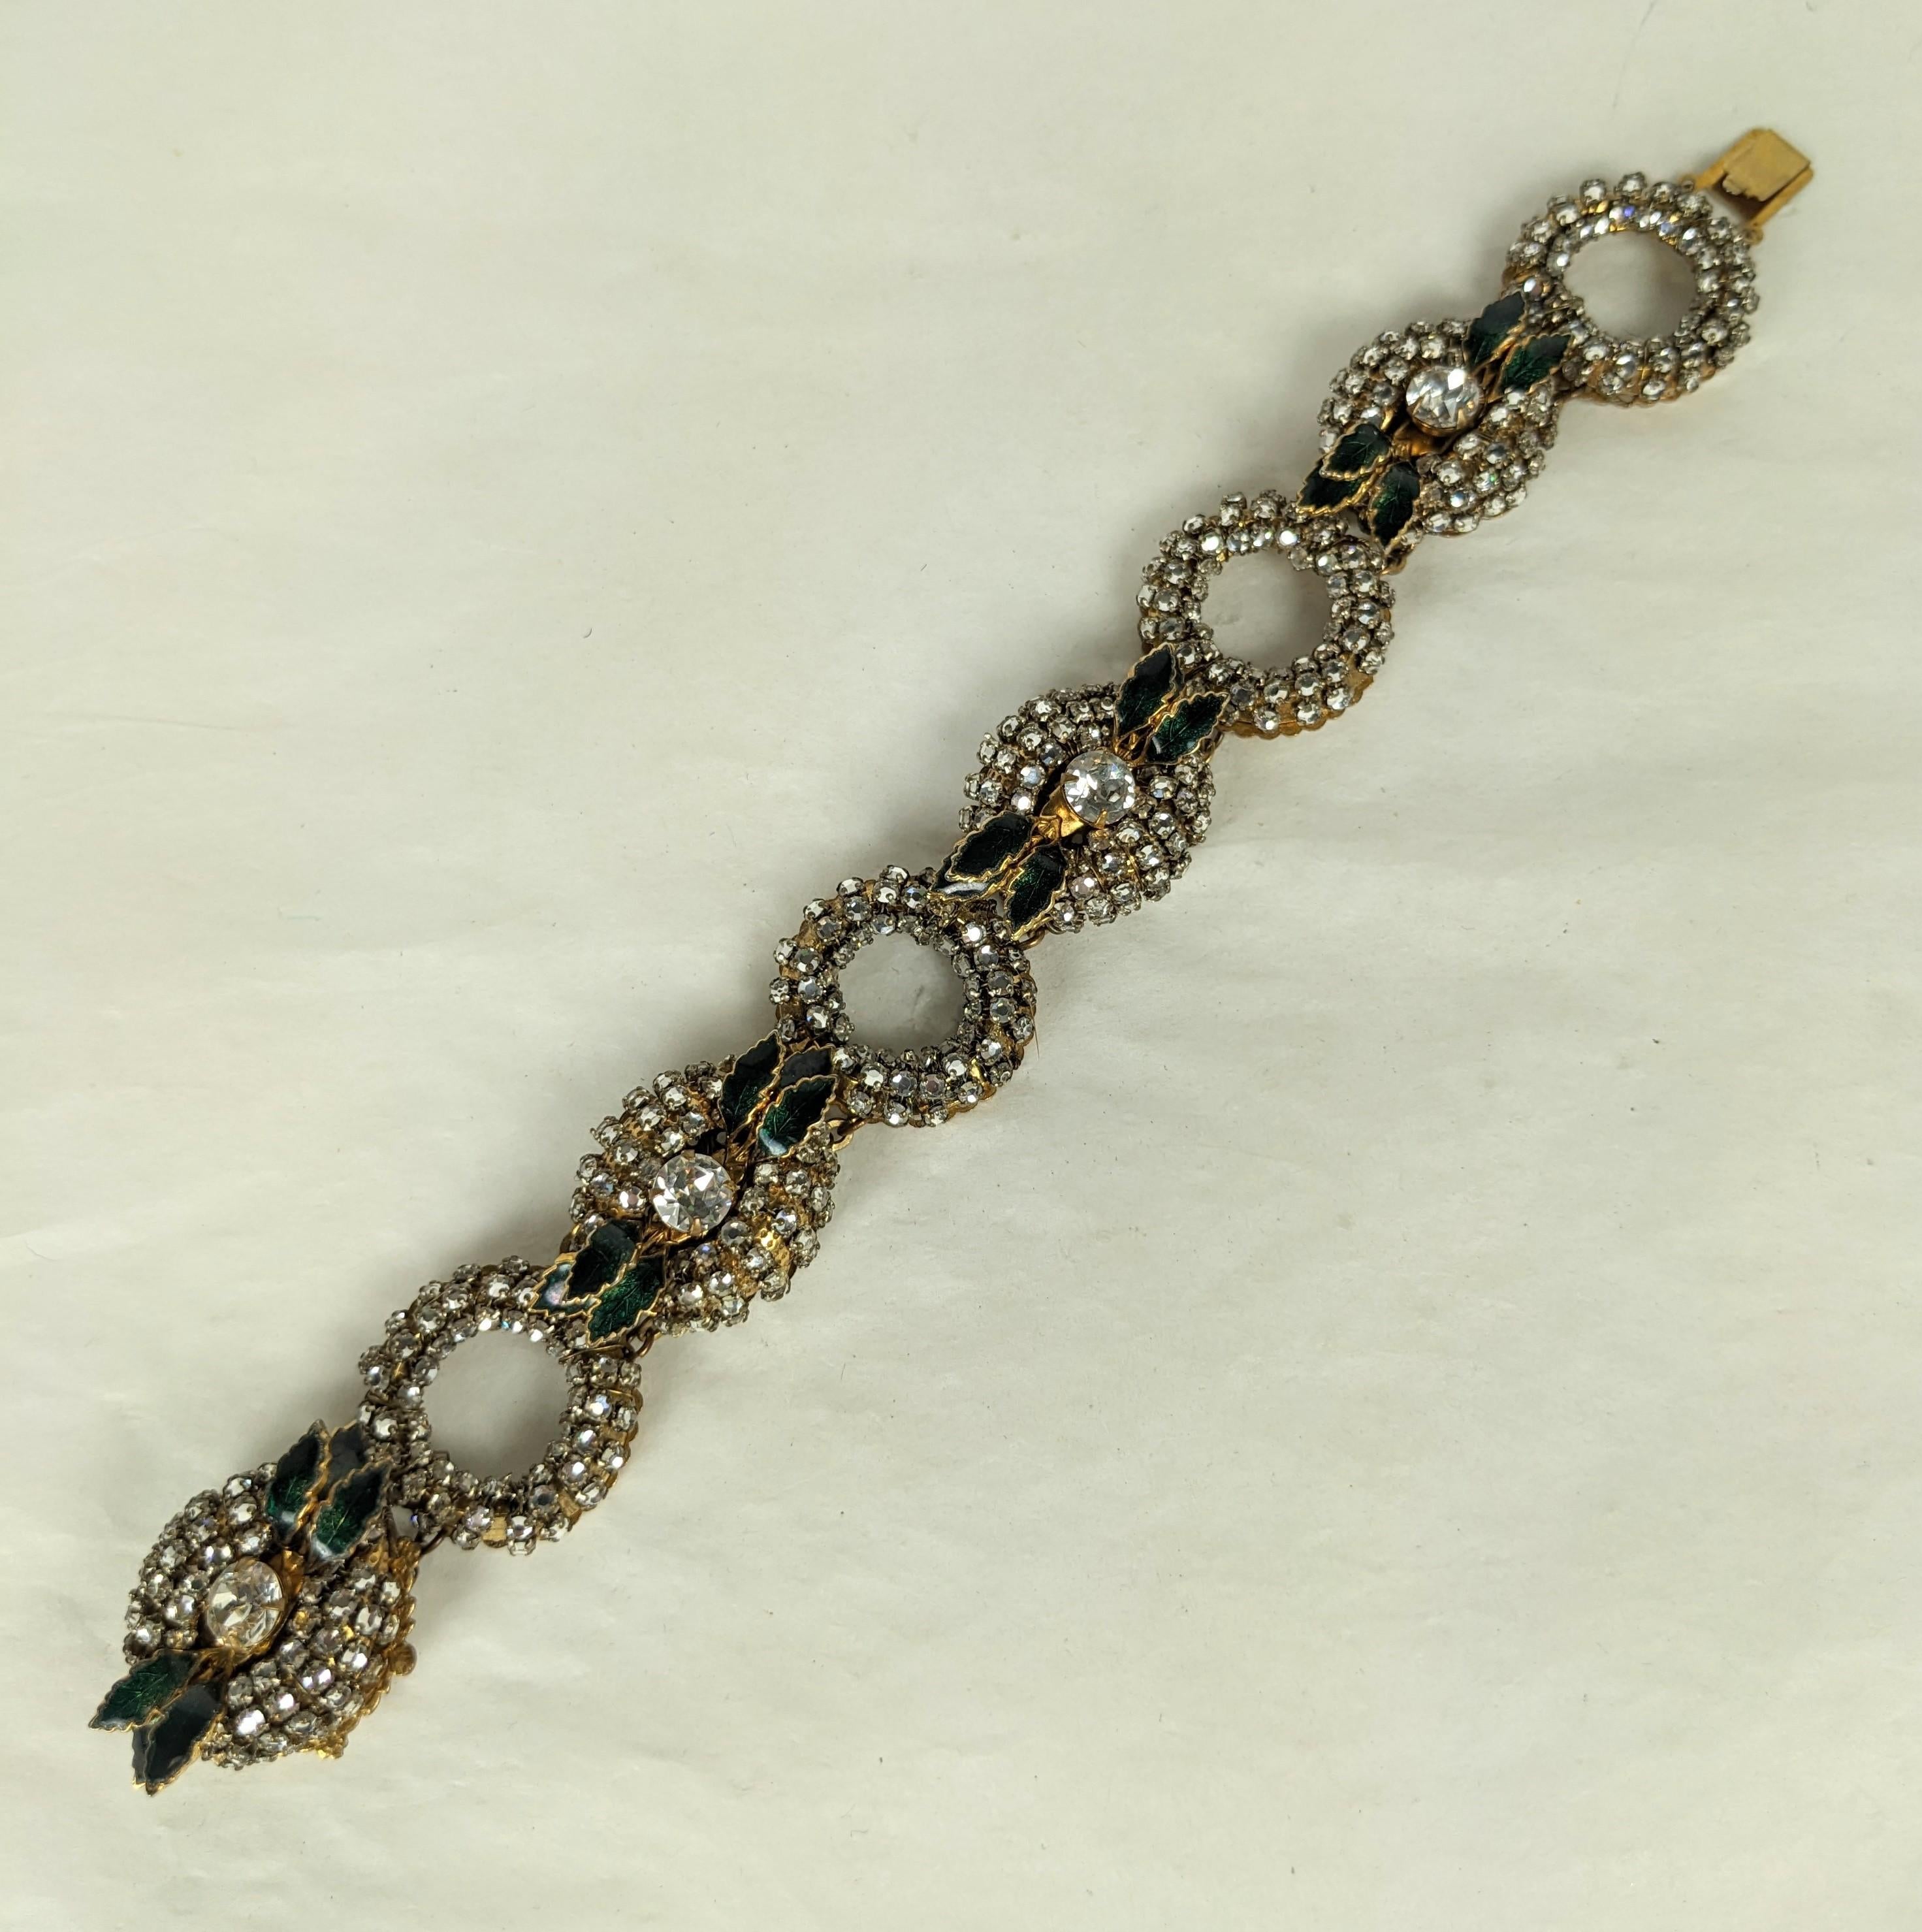 Amazing Miriam Haskell Rose Montees Crystal Link and Enamel Bracelet from the 1940's. Incredibly ornate construction with links completely hand embroidered with rose montee crystals with green enamel leaves. 7.75